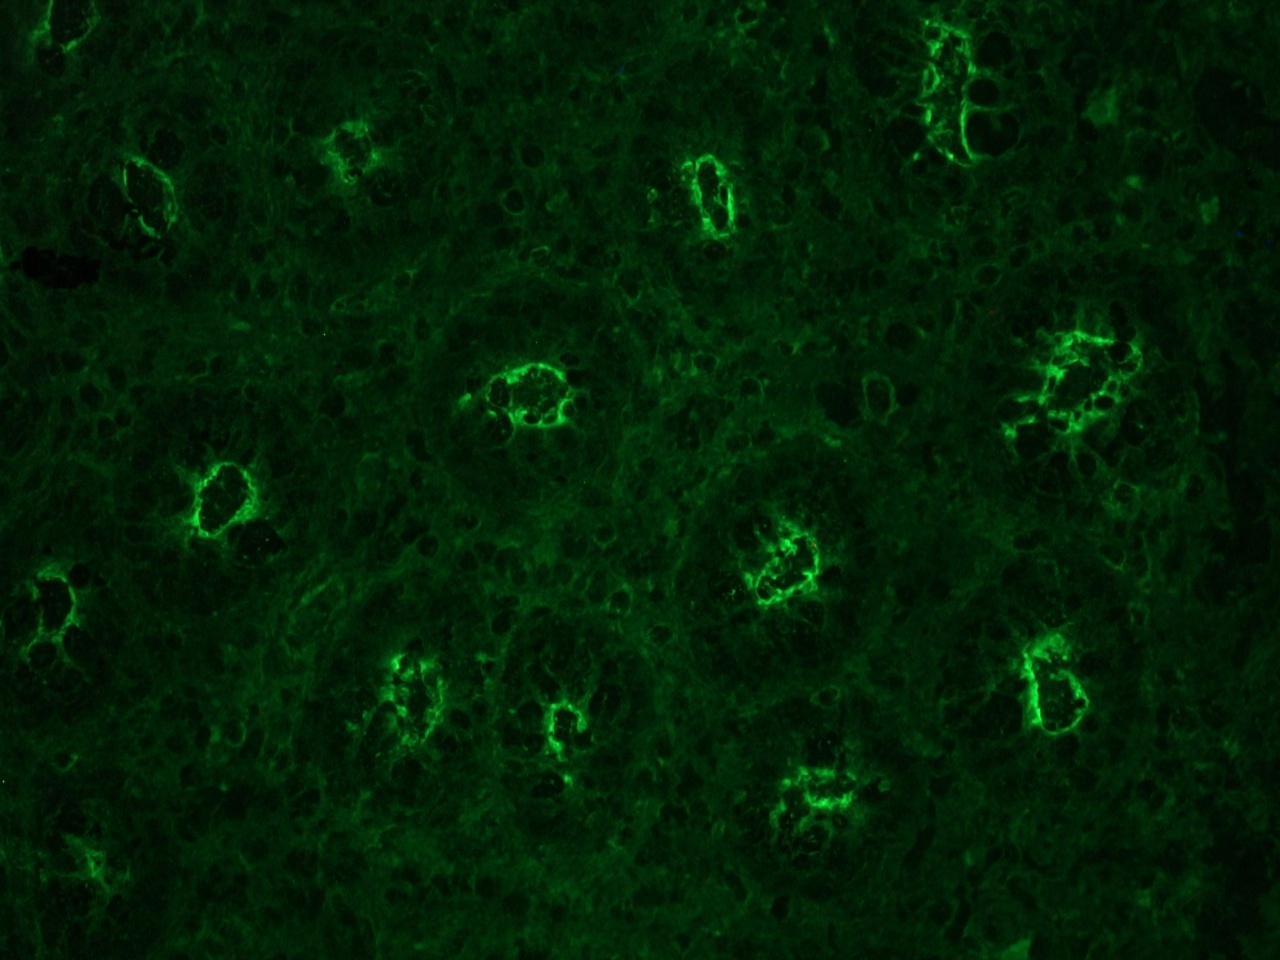 Figure 2. Reactivity of MUB0111P (up to a 1:1000 dilution) in the epithelial villi in swine colon.